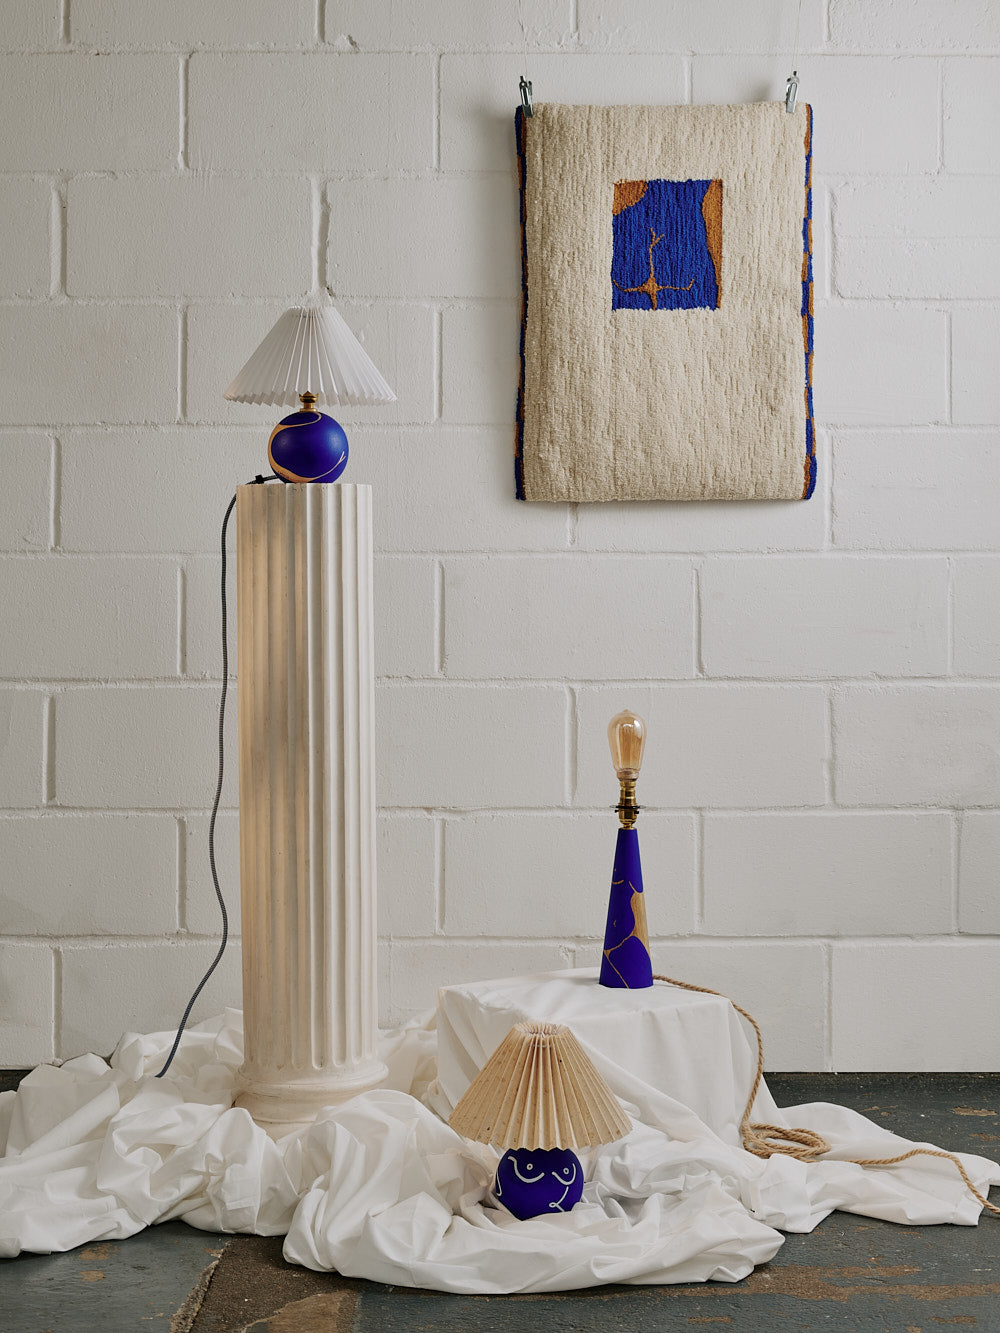 Photograph of rising artist Laxmi Hussain's homeware collection, containing her figurative hand painted wooden lamp titled Elegant Transition 2.